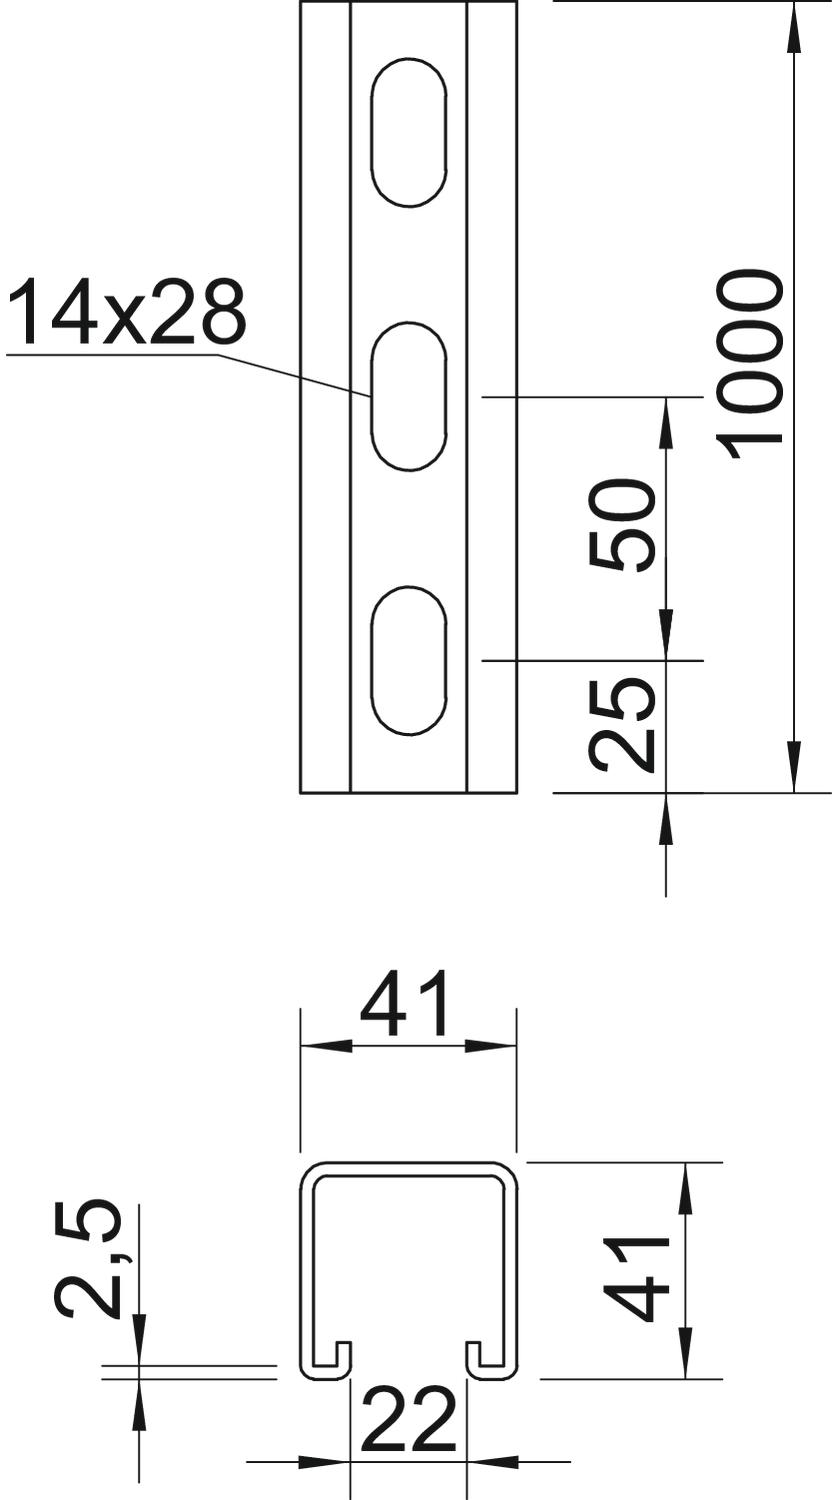 MS4141 mounting rail, slot 22 mm, FT, perforated